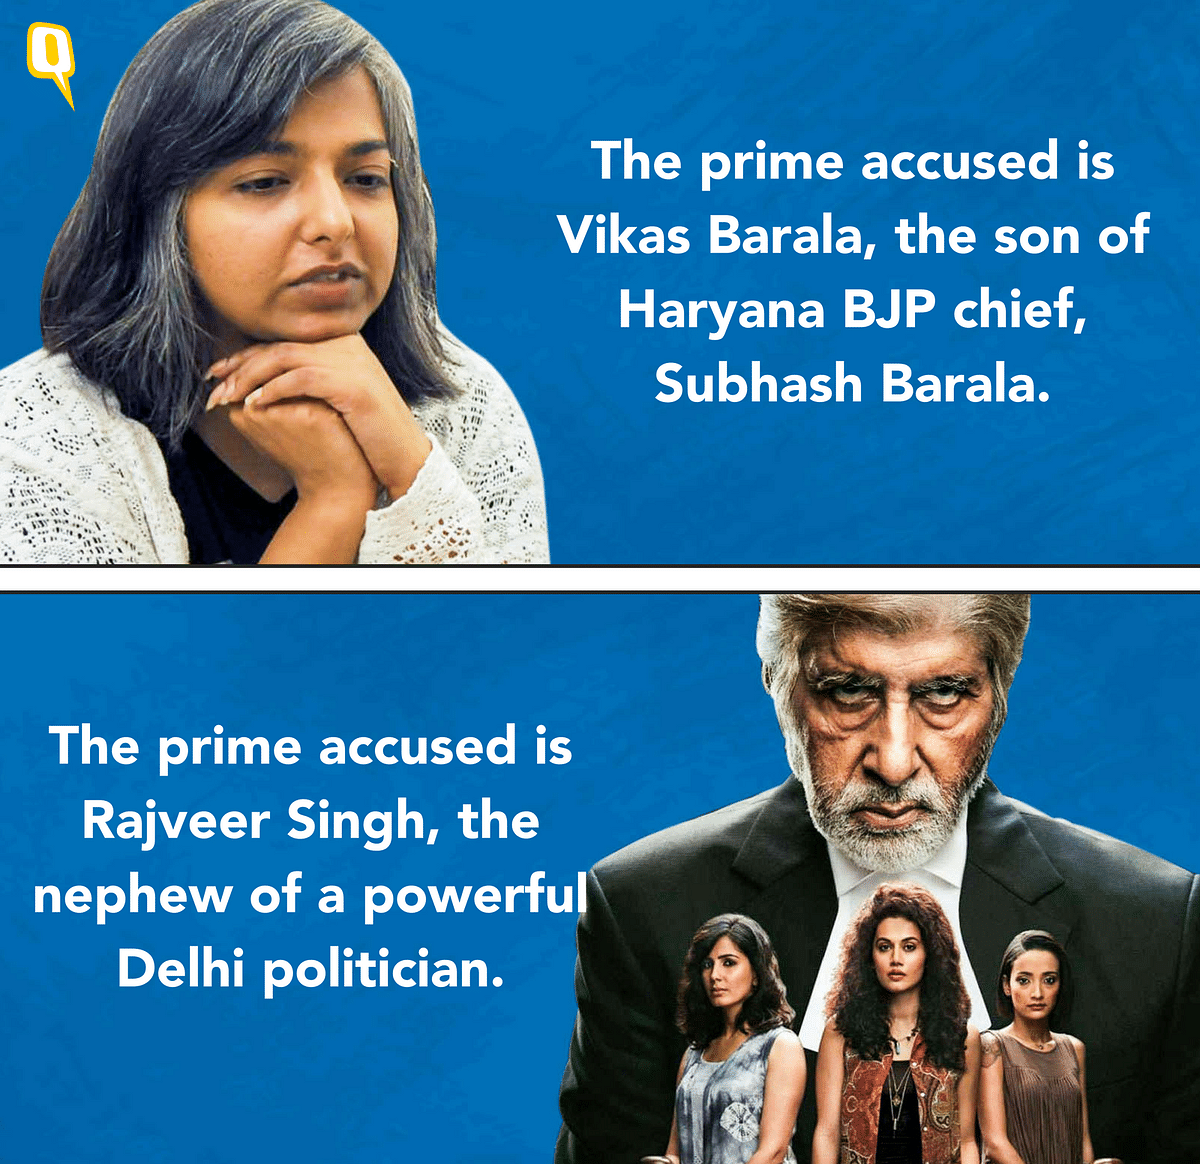 A number of similarities may be charted between events described in Pink and the Varnika Kundu stalking incident.